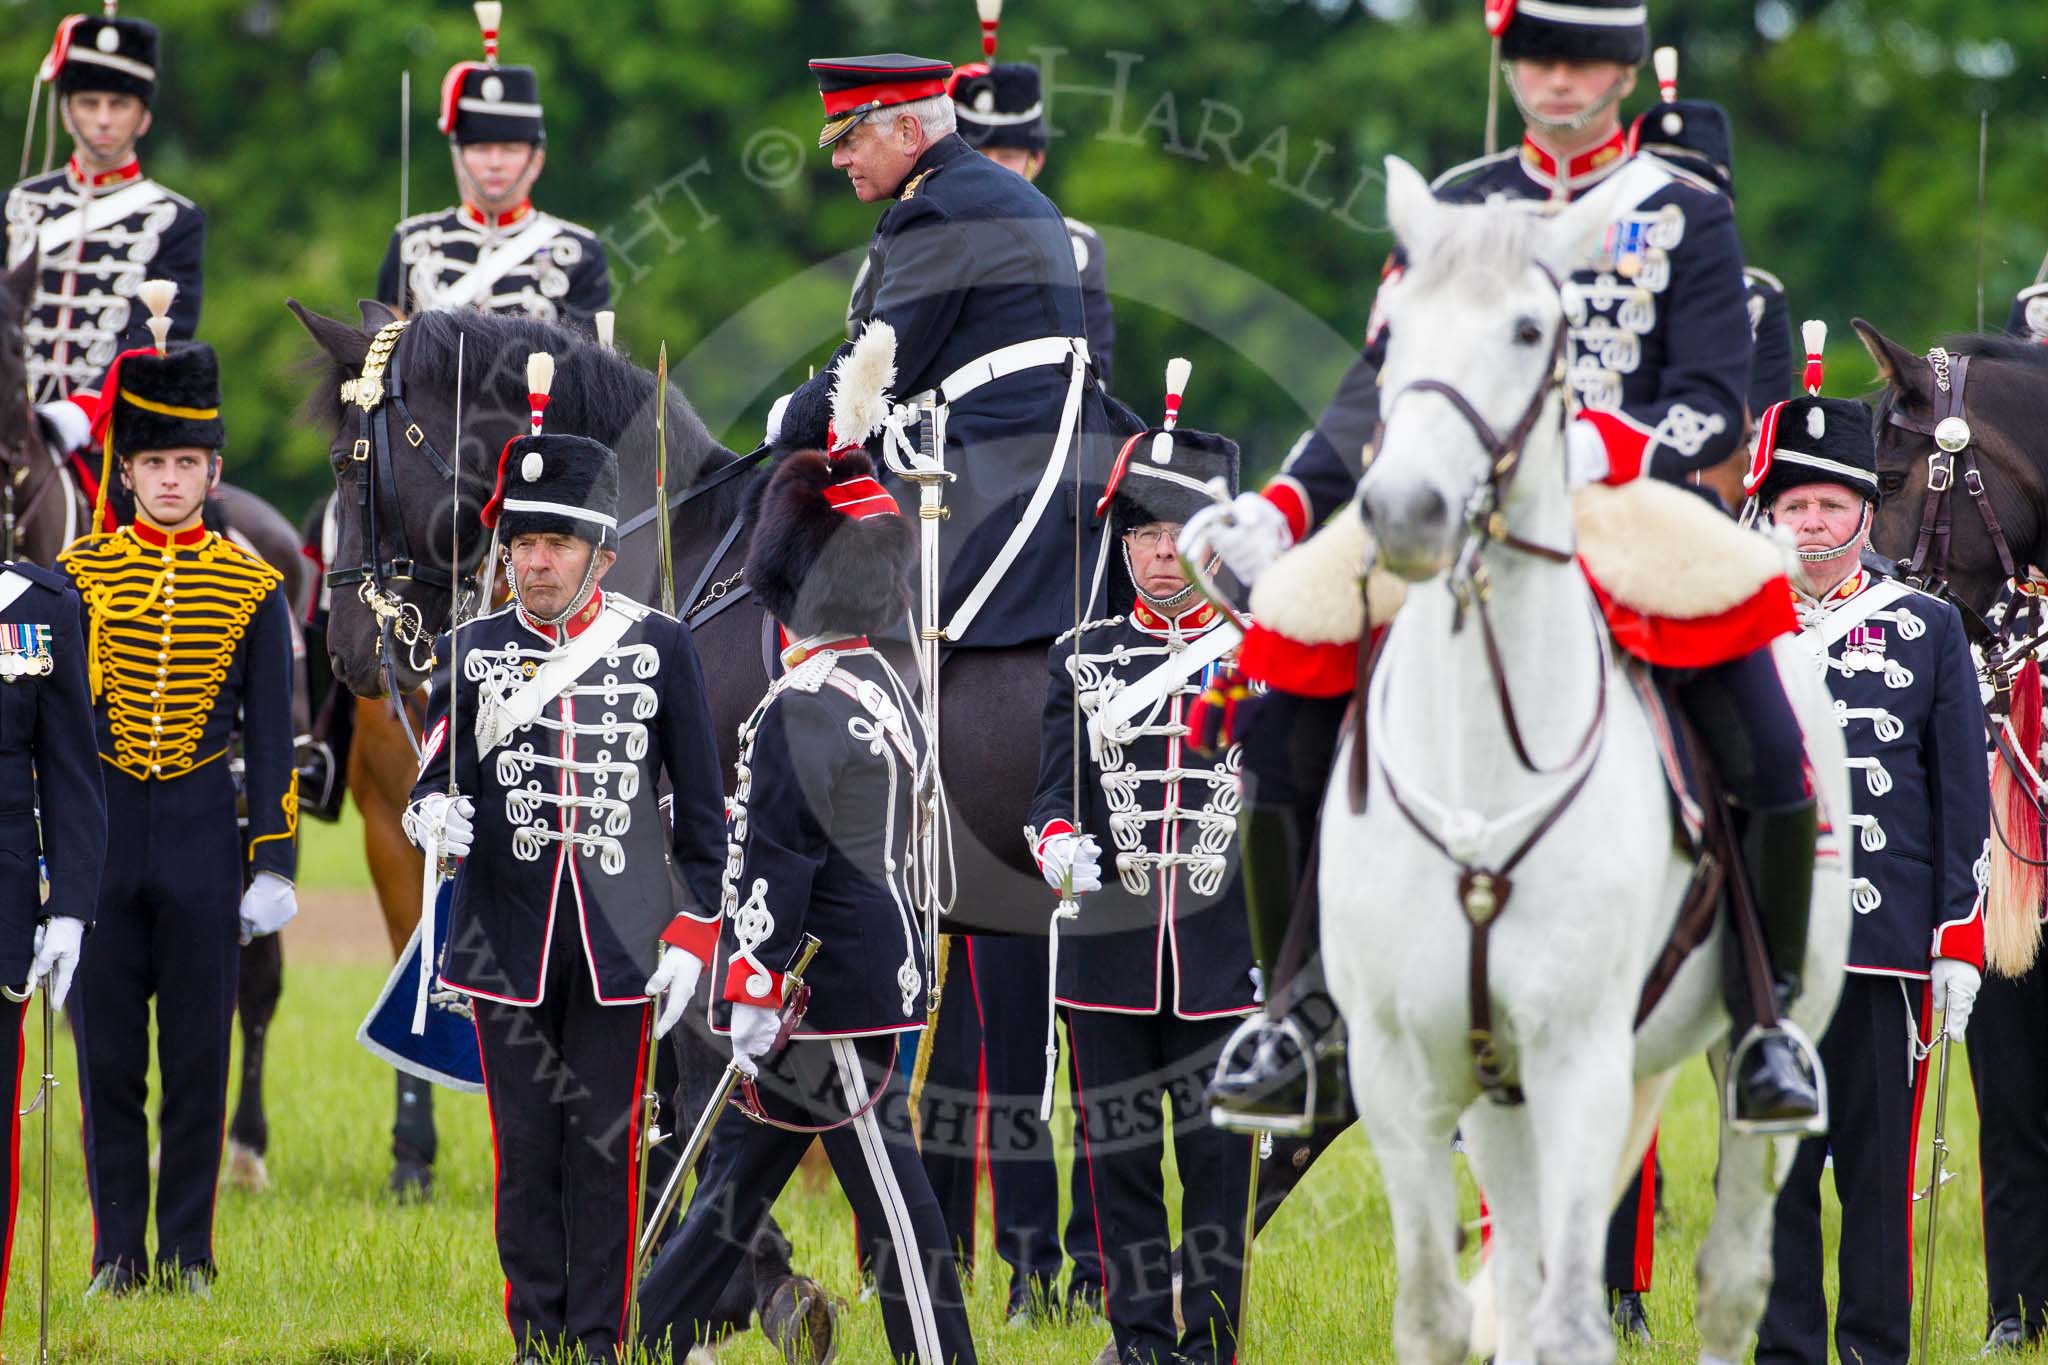 The Light Cavalry HAC Annual Review and Inspection 2013.
Windsor Great Park Review Ground,
Windsor,
Berkshire,
United Kingdom,
on 09 June 2013 at 13:26, image #355